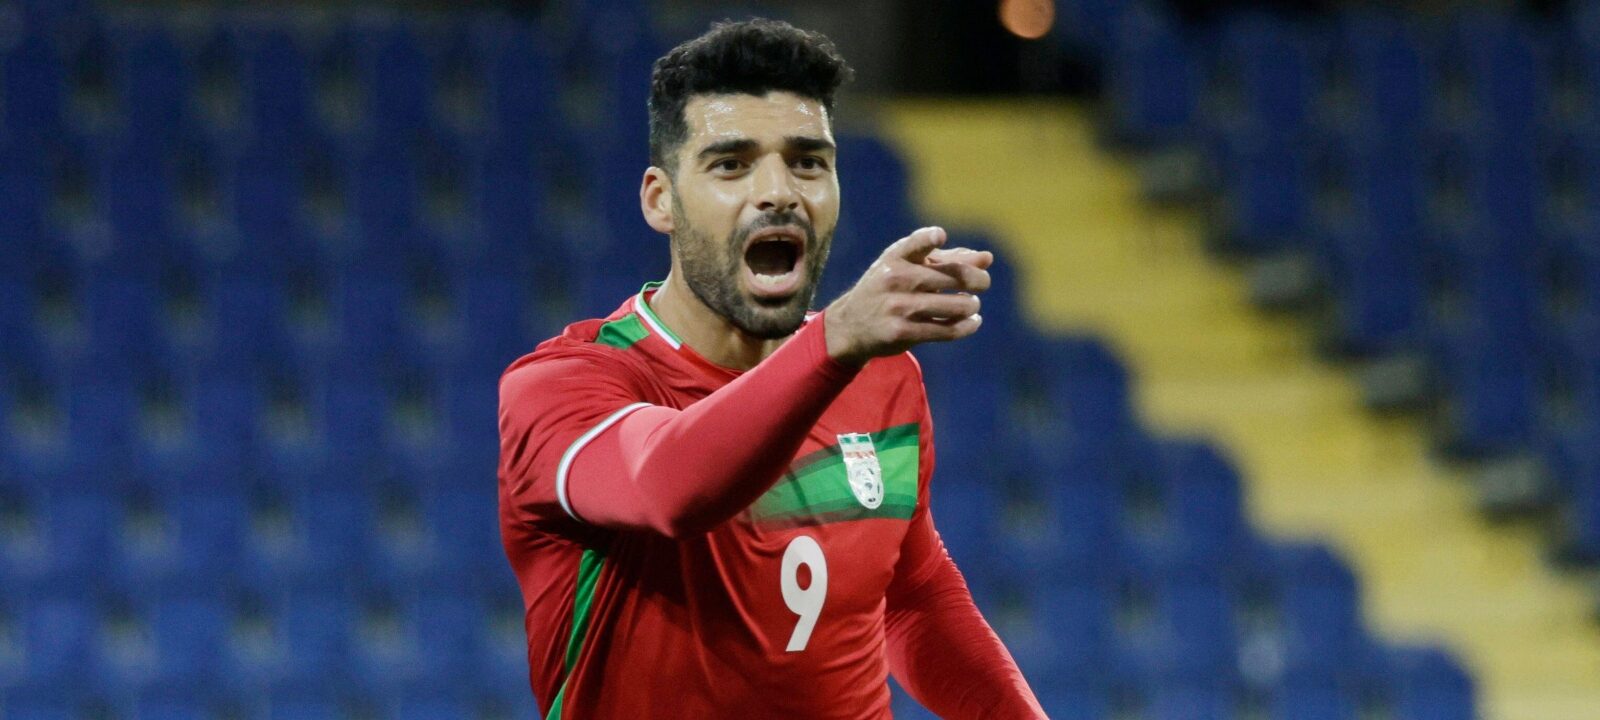 Mehdi Taremi is one of the options to shore up the Inter attack, but they’d have to spend lavishly to purchase him for Porto.